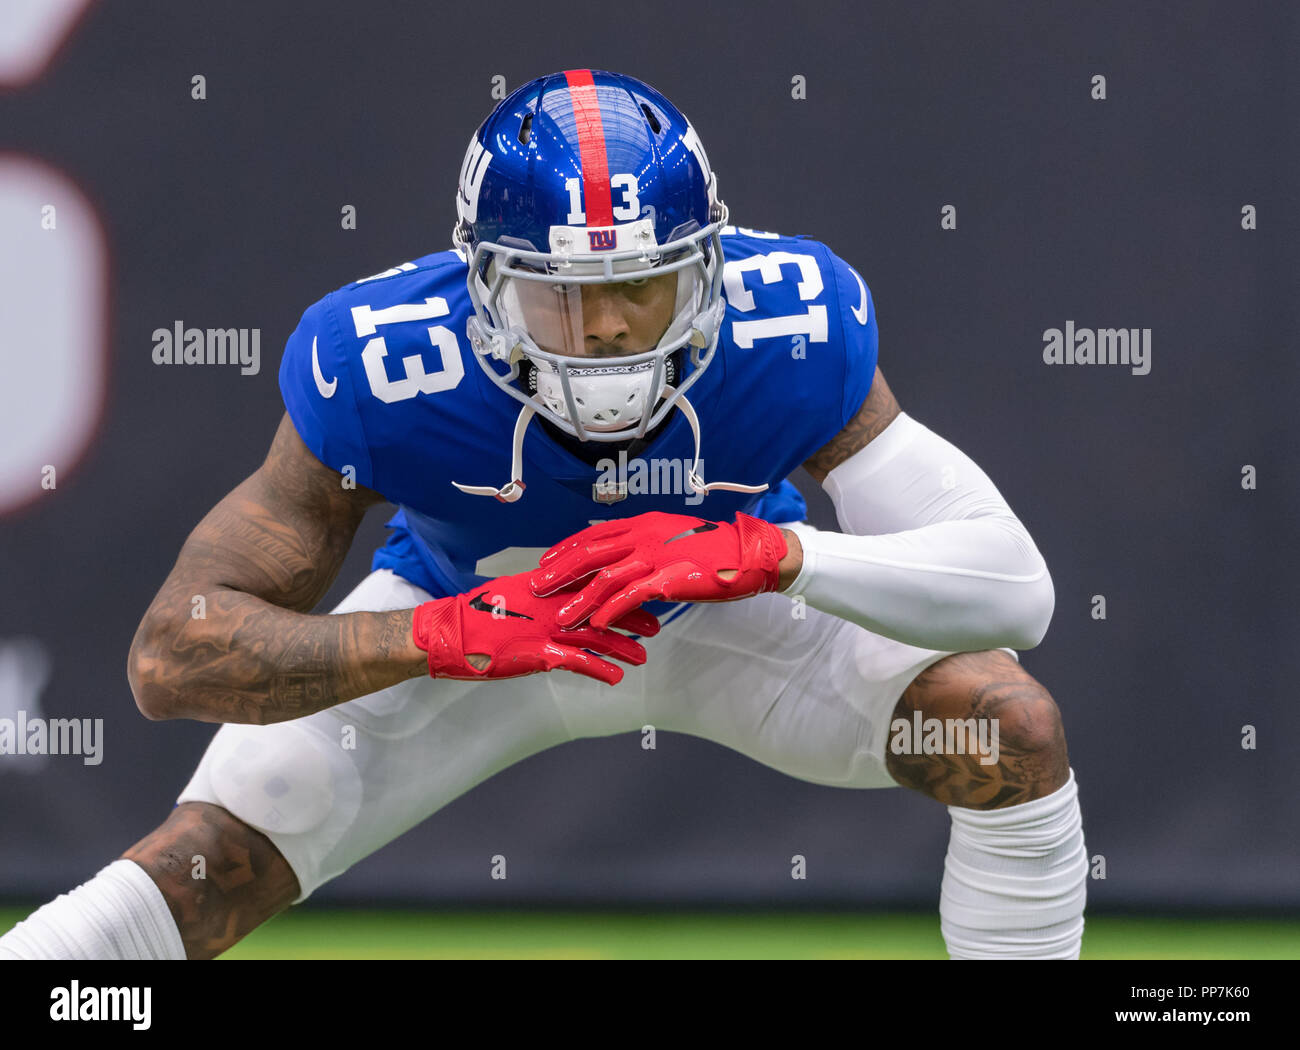 New York Giants wide receiver Odell Beckham (13) prior to the NFL